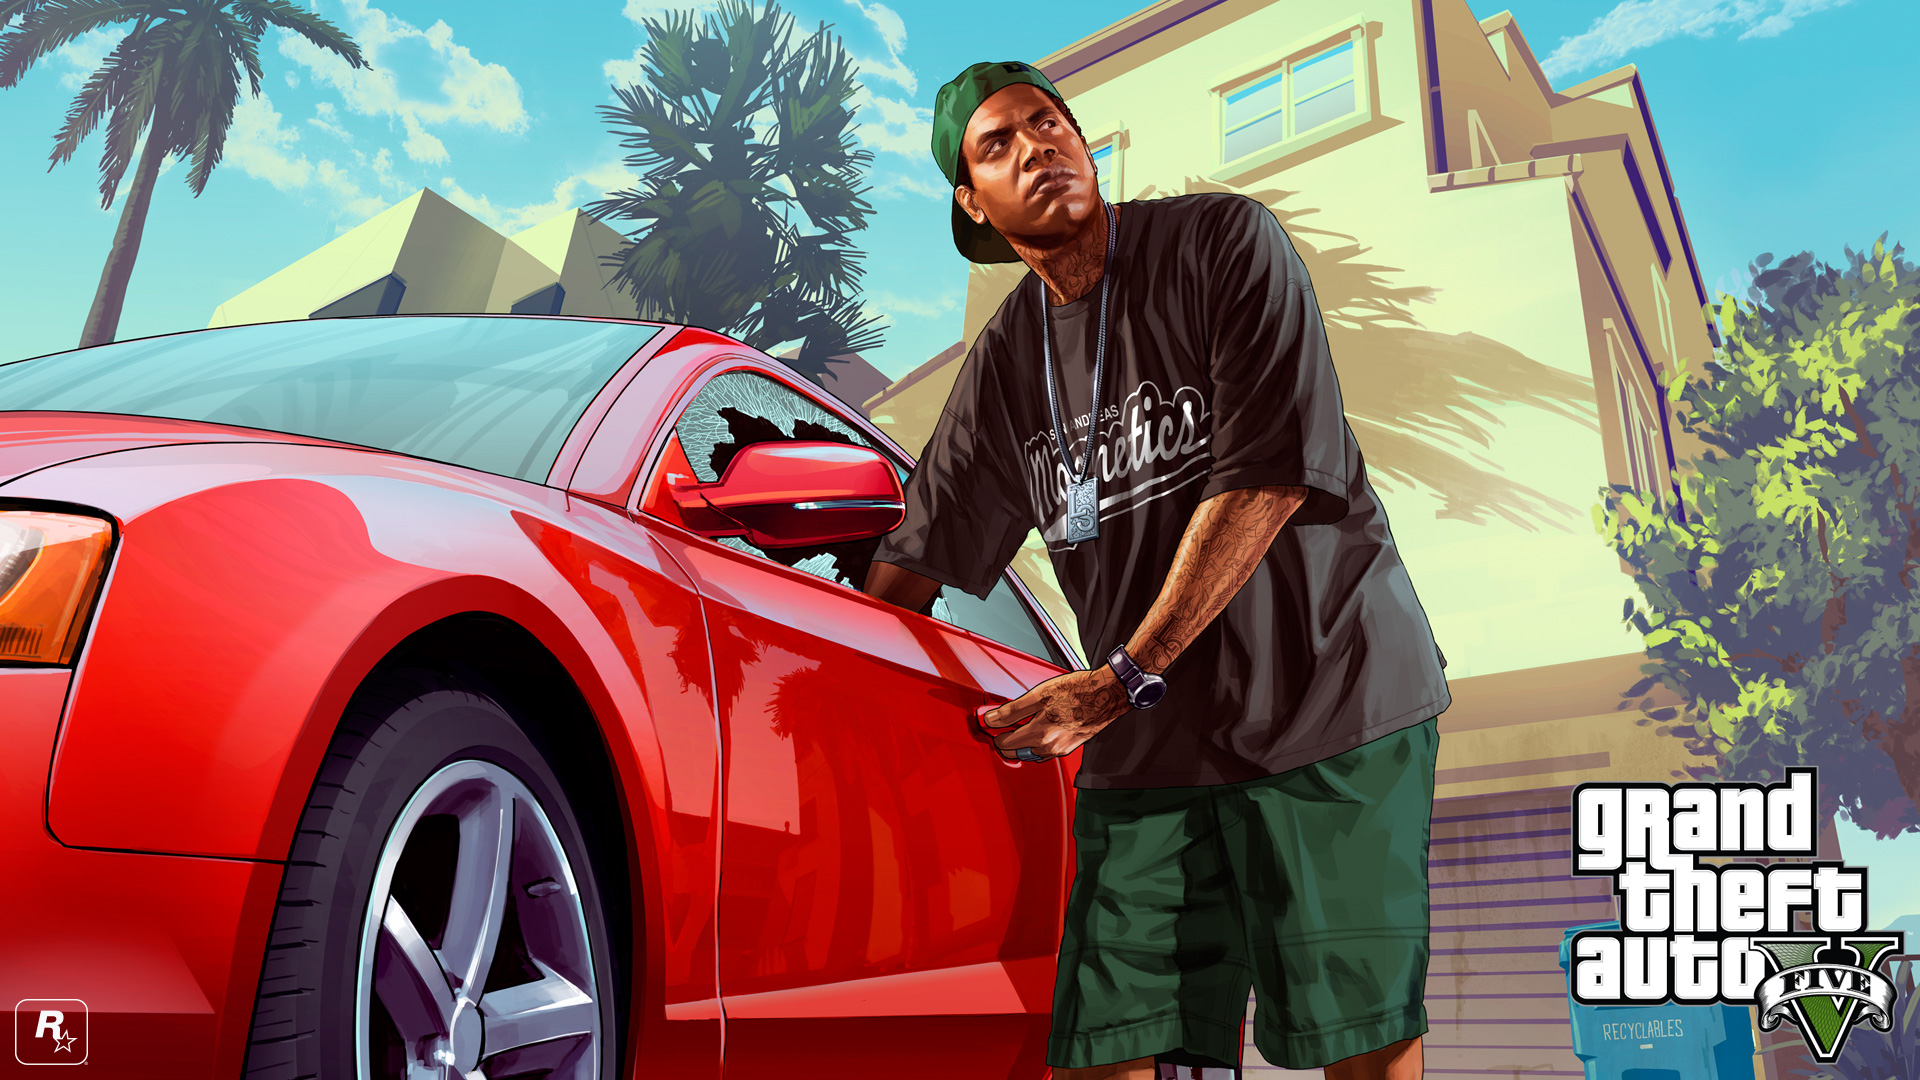 Lamar in a black shirt and green shorts breaking into a red sports car by breaking the window.